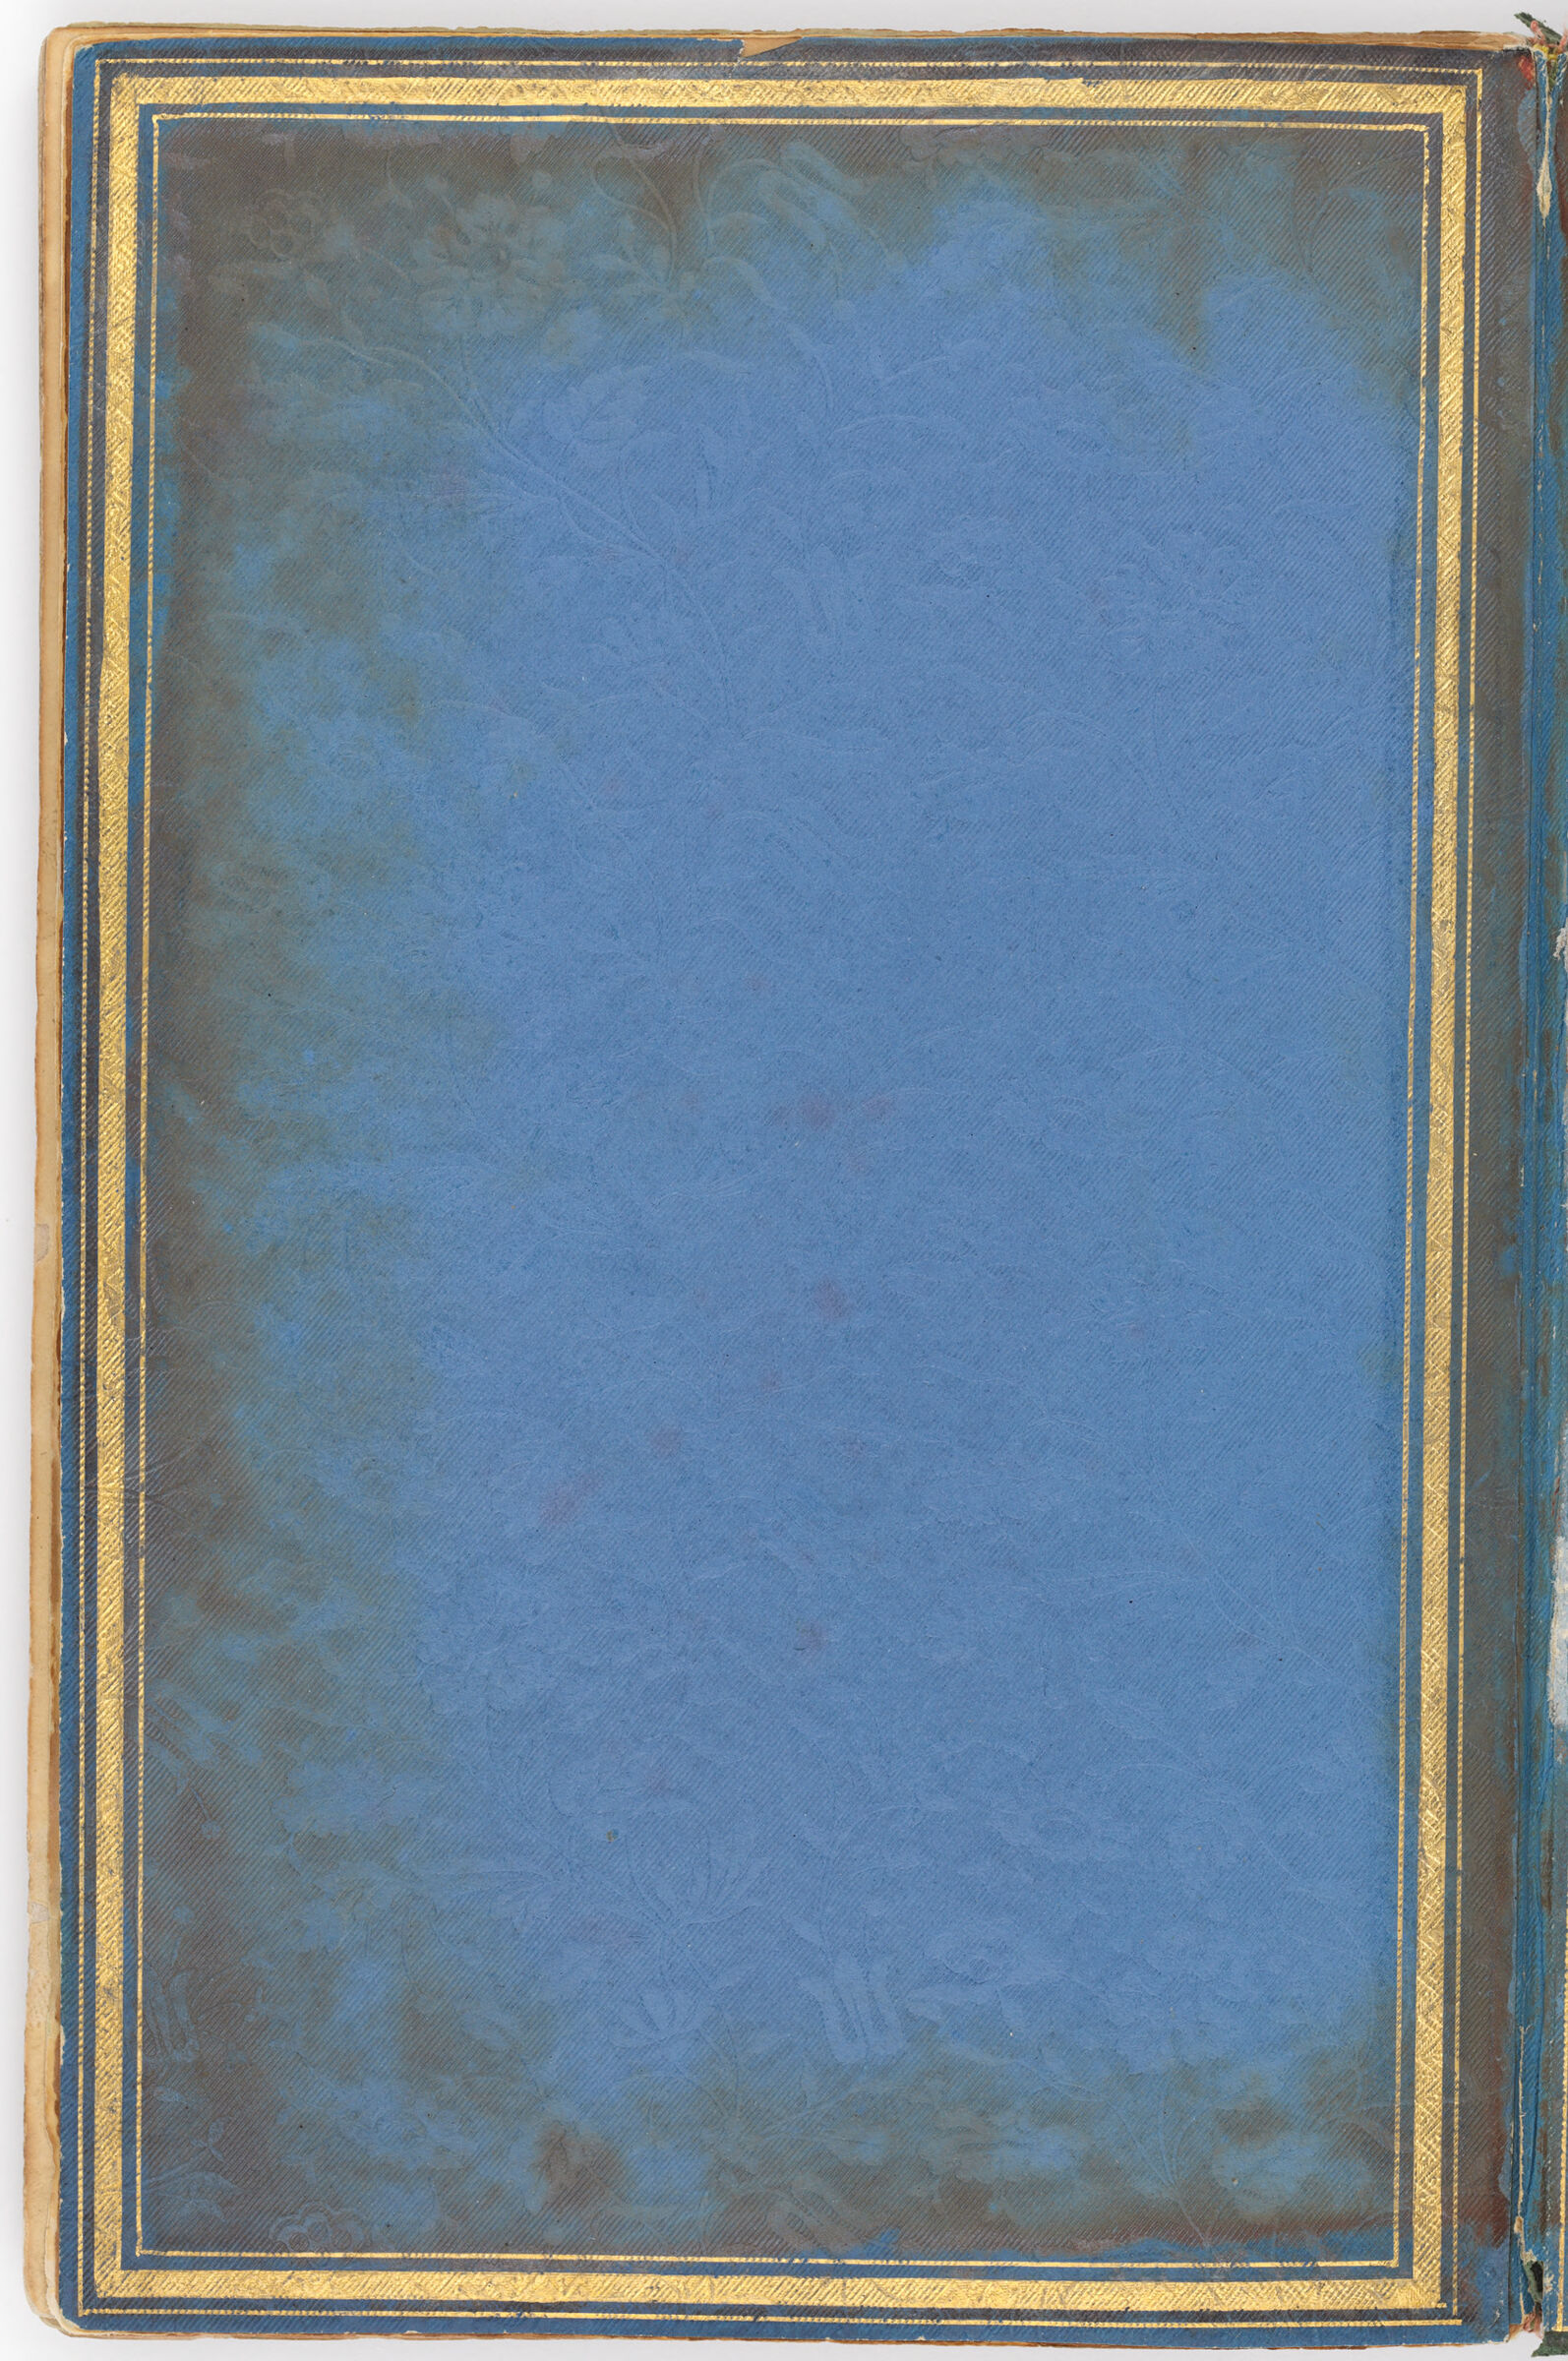 Folio With Extension Of The Doublure’s Support (Blue Paper With Embossed Patterns Recto; Blank Verso Of Folio 1), From A Manuscript Of The Ruba‘yyat By ‘Umar Khayyam